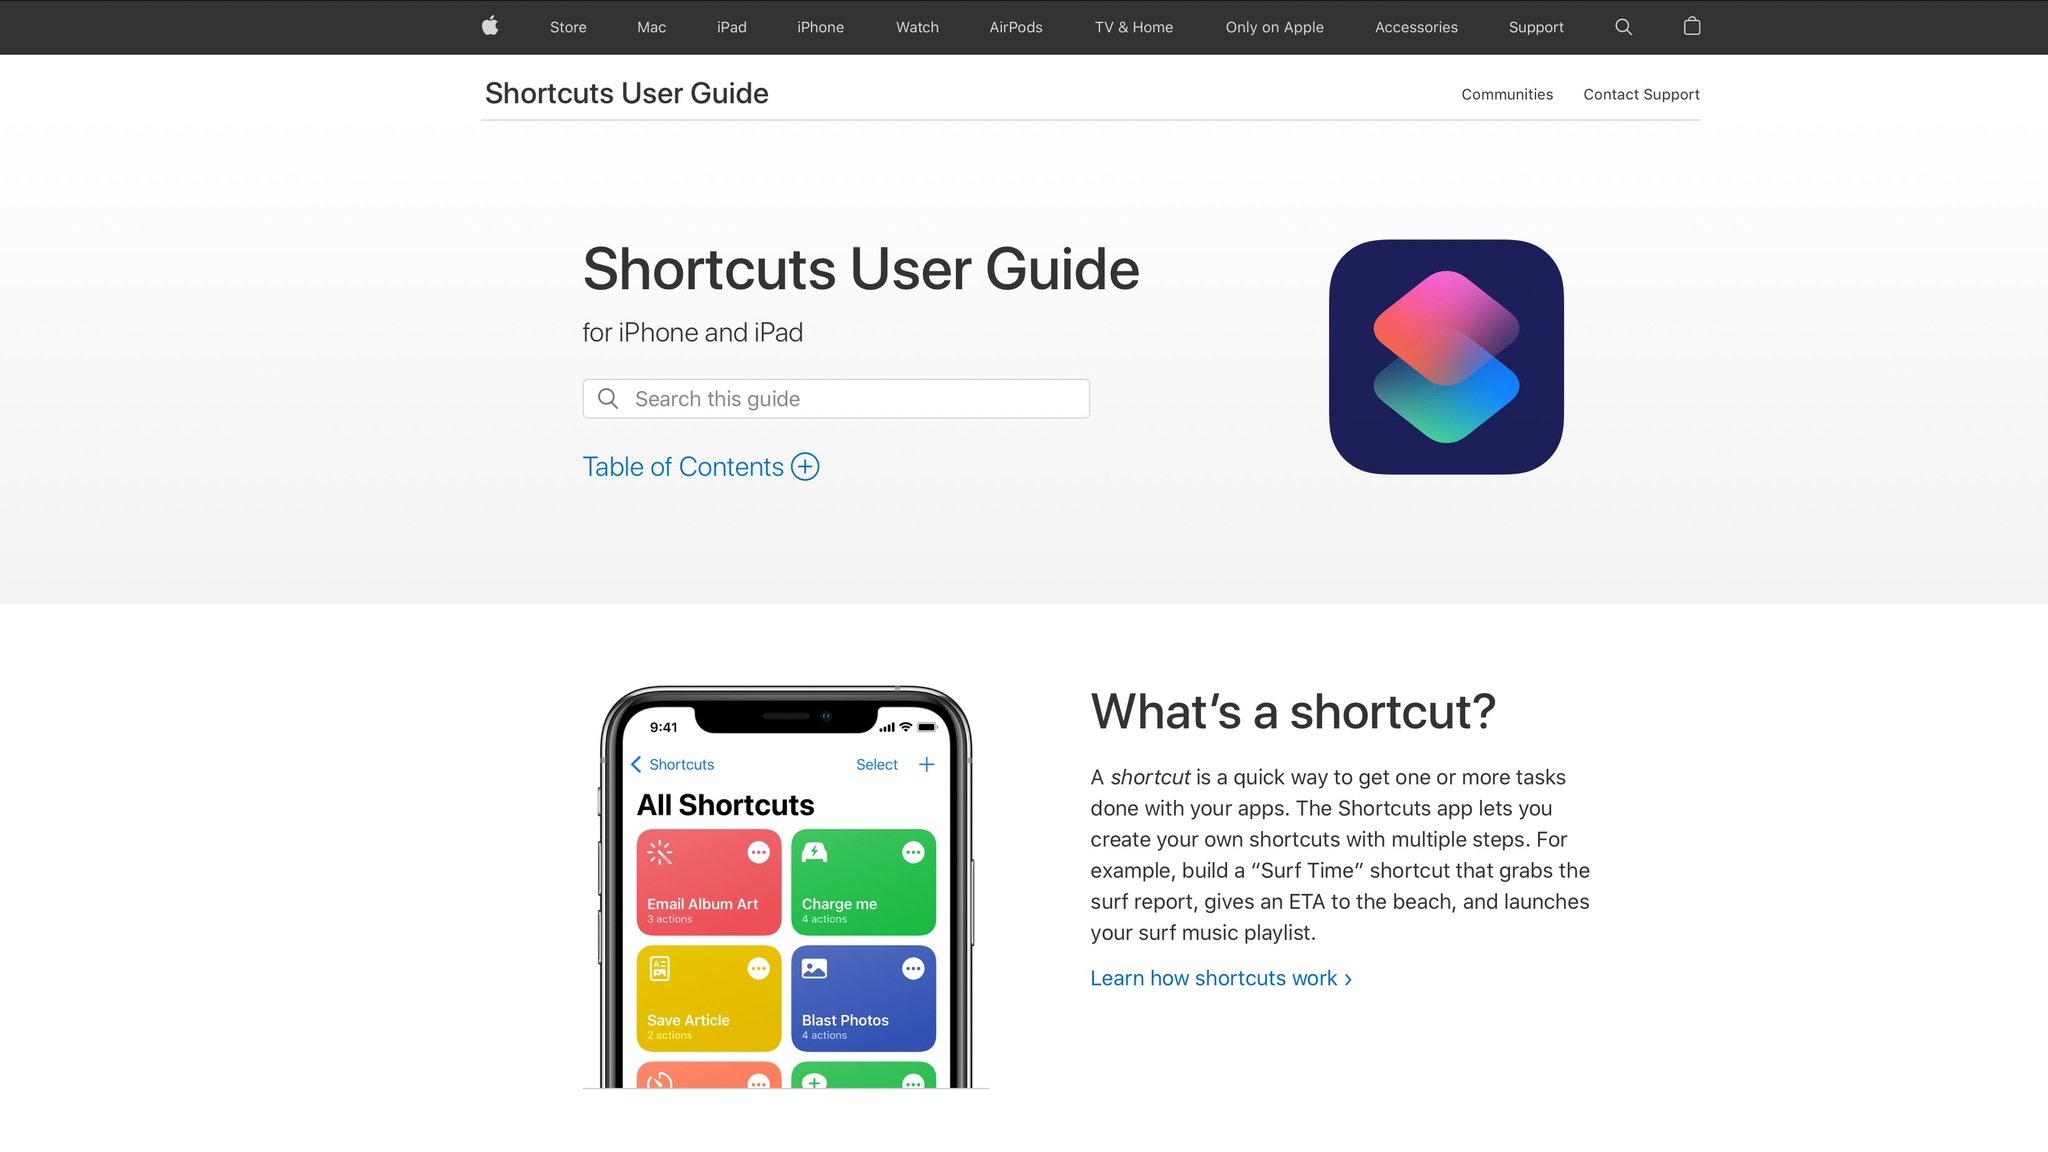 Screenshot of the Shortcuts User Guide on Apple.com